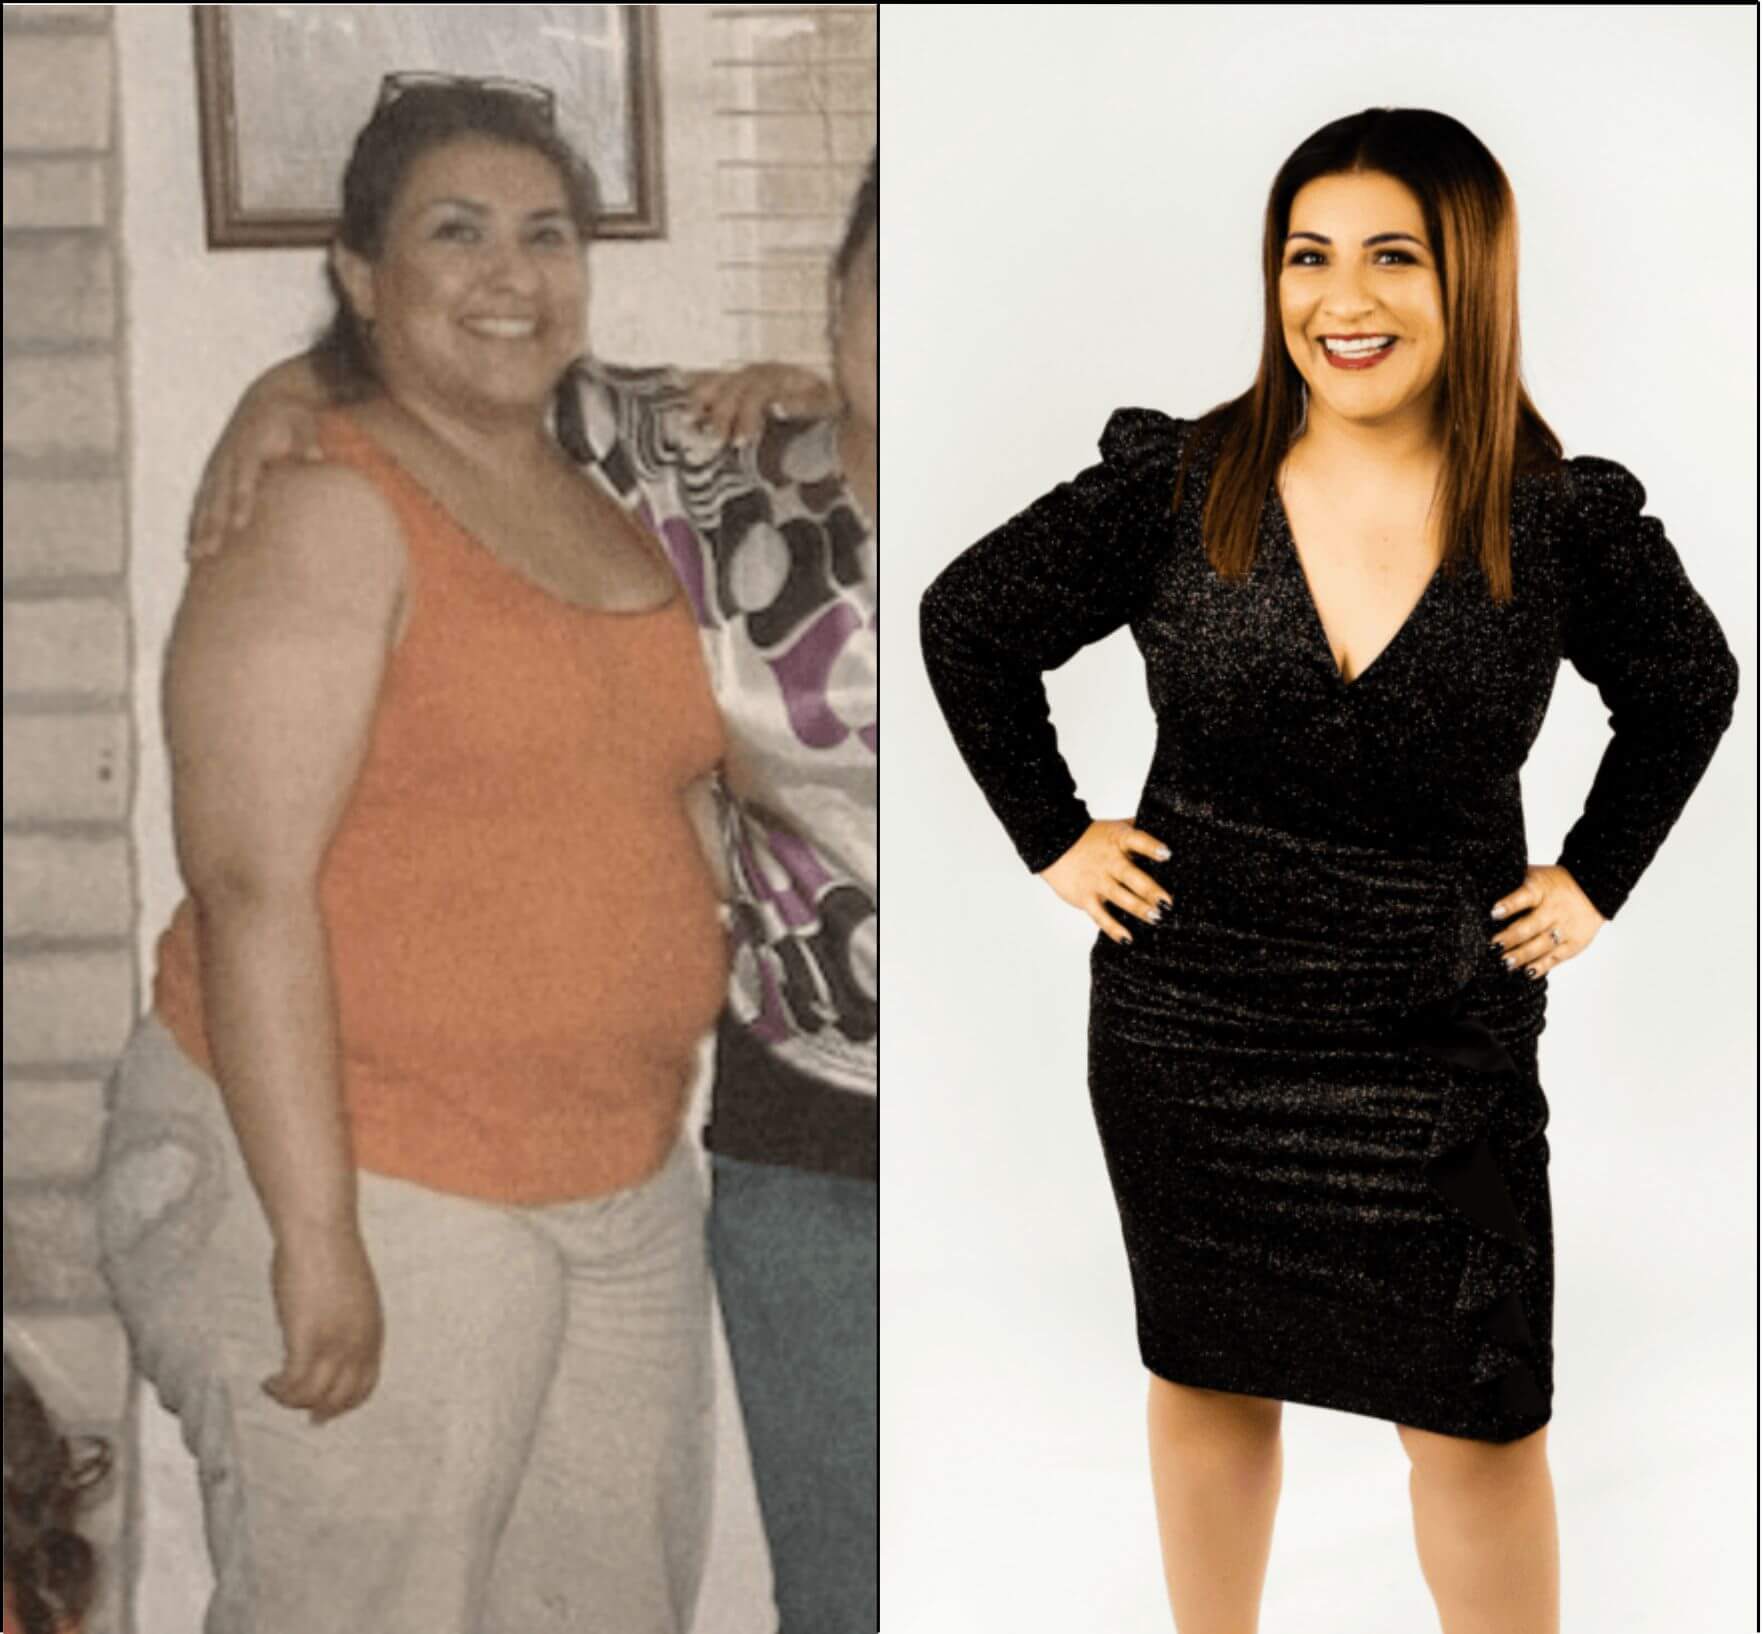 Two photos of a woman before and after weight loss.